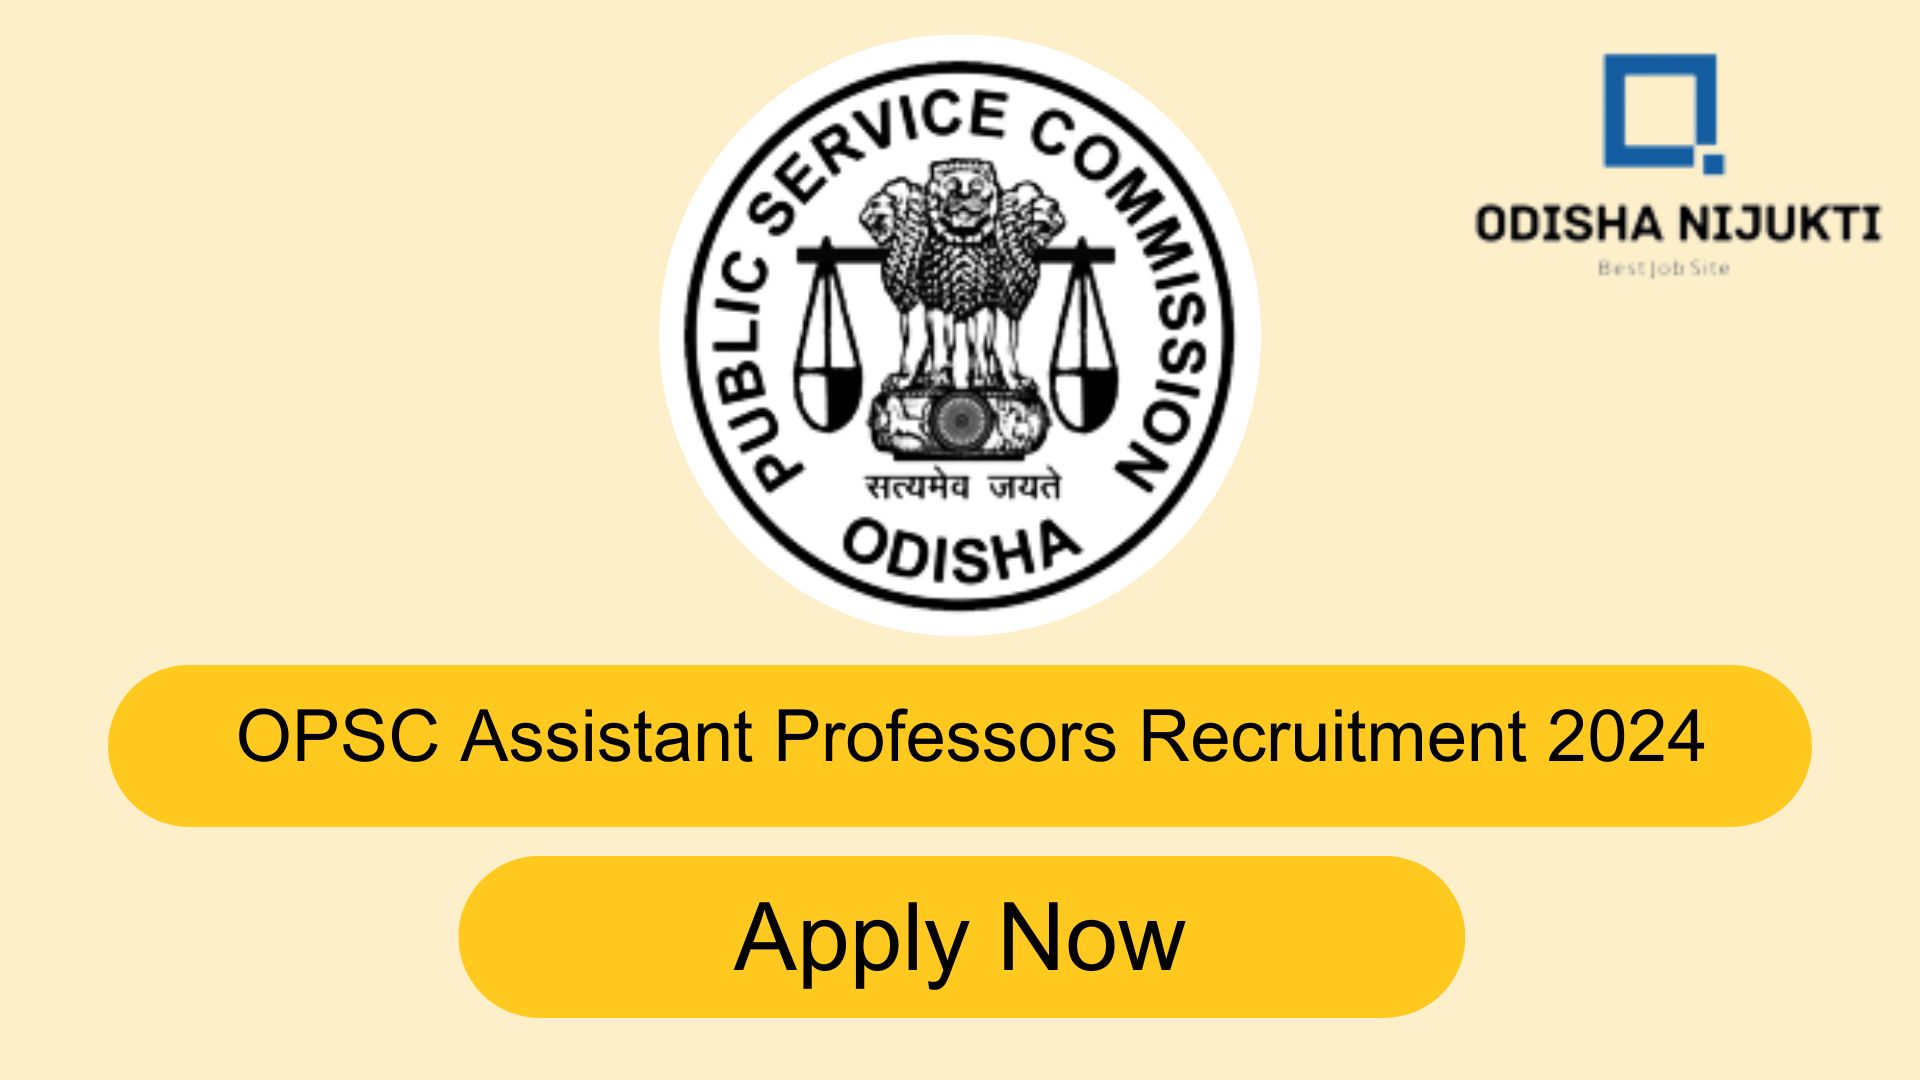 OPSC-Assistant-Professors-Recruitment-2024-Notifications-Out-for-385-Assistant-Professors-Posts-